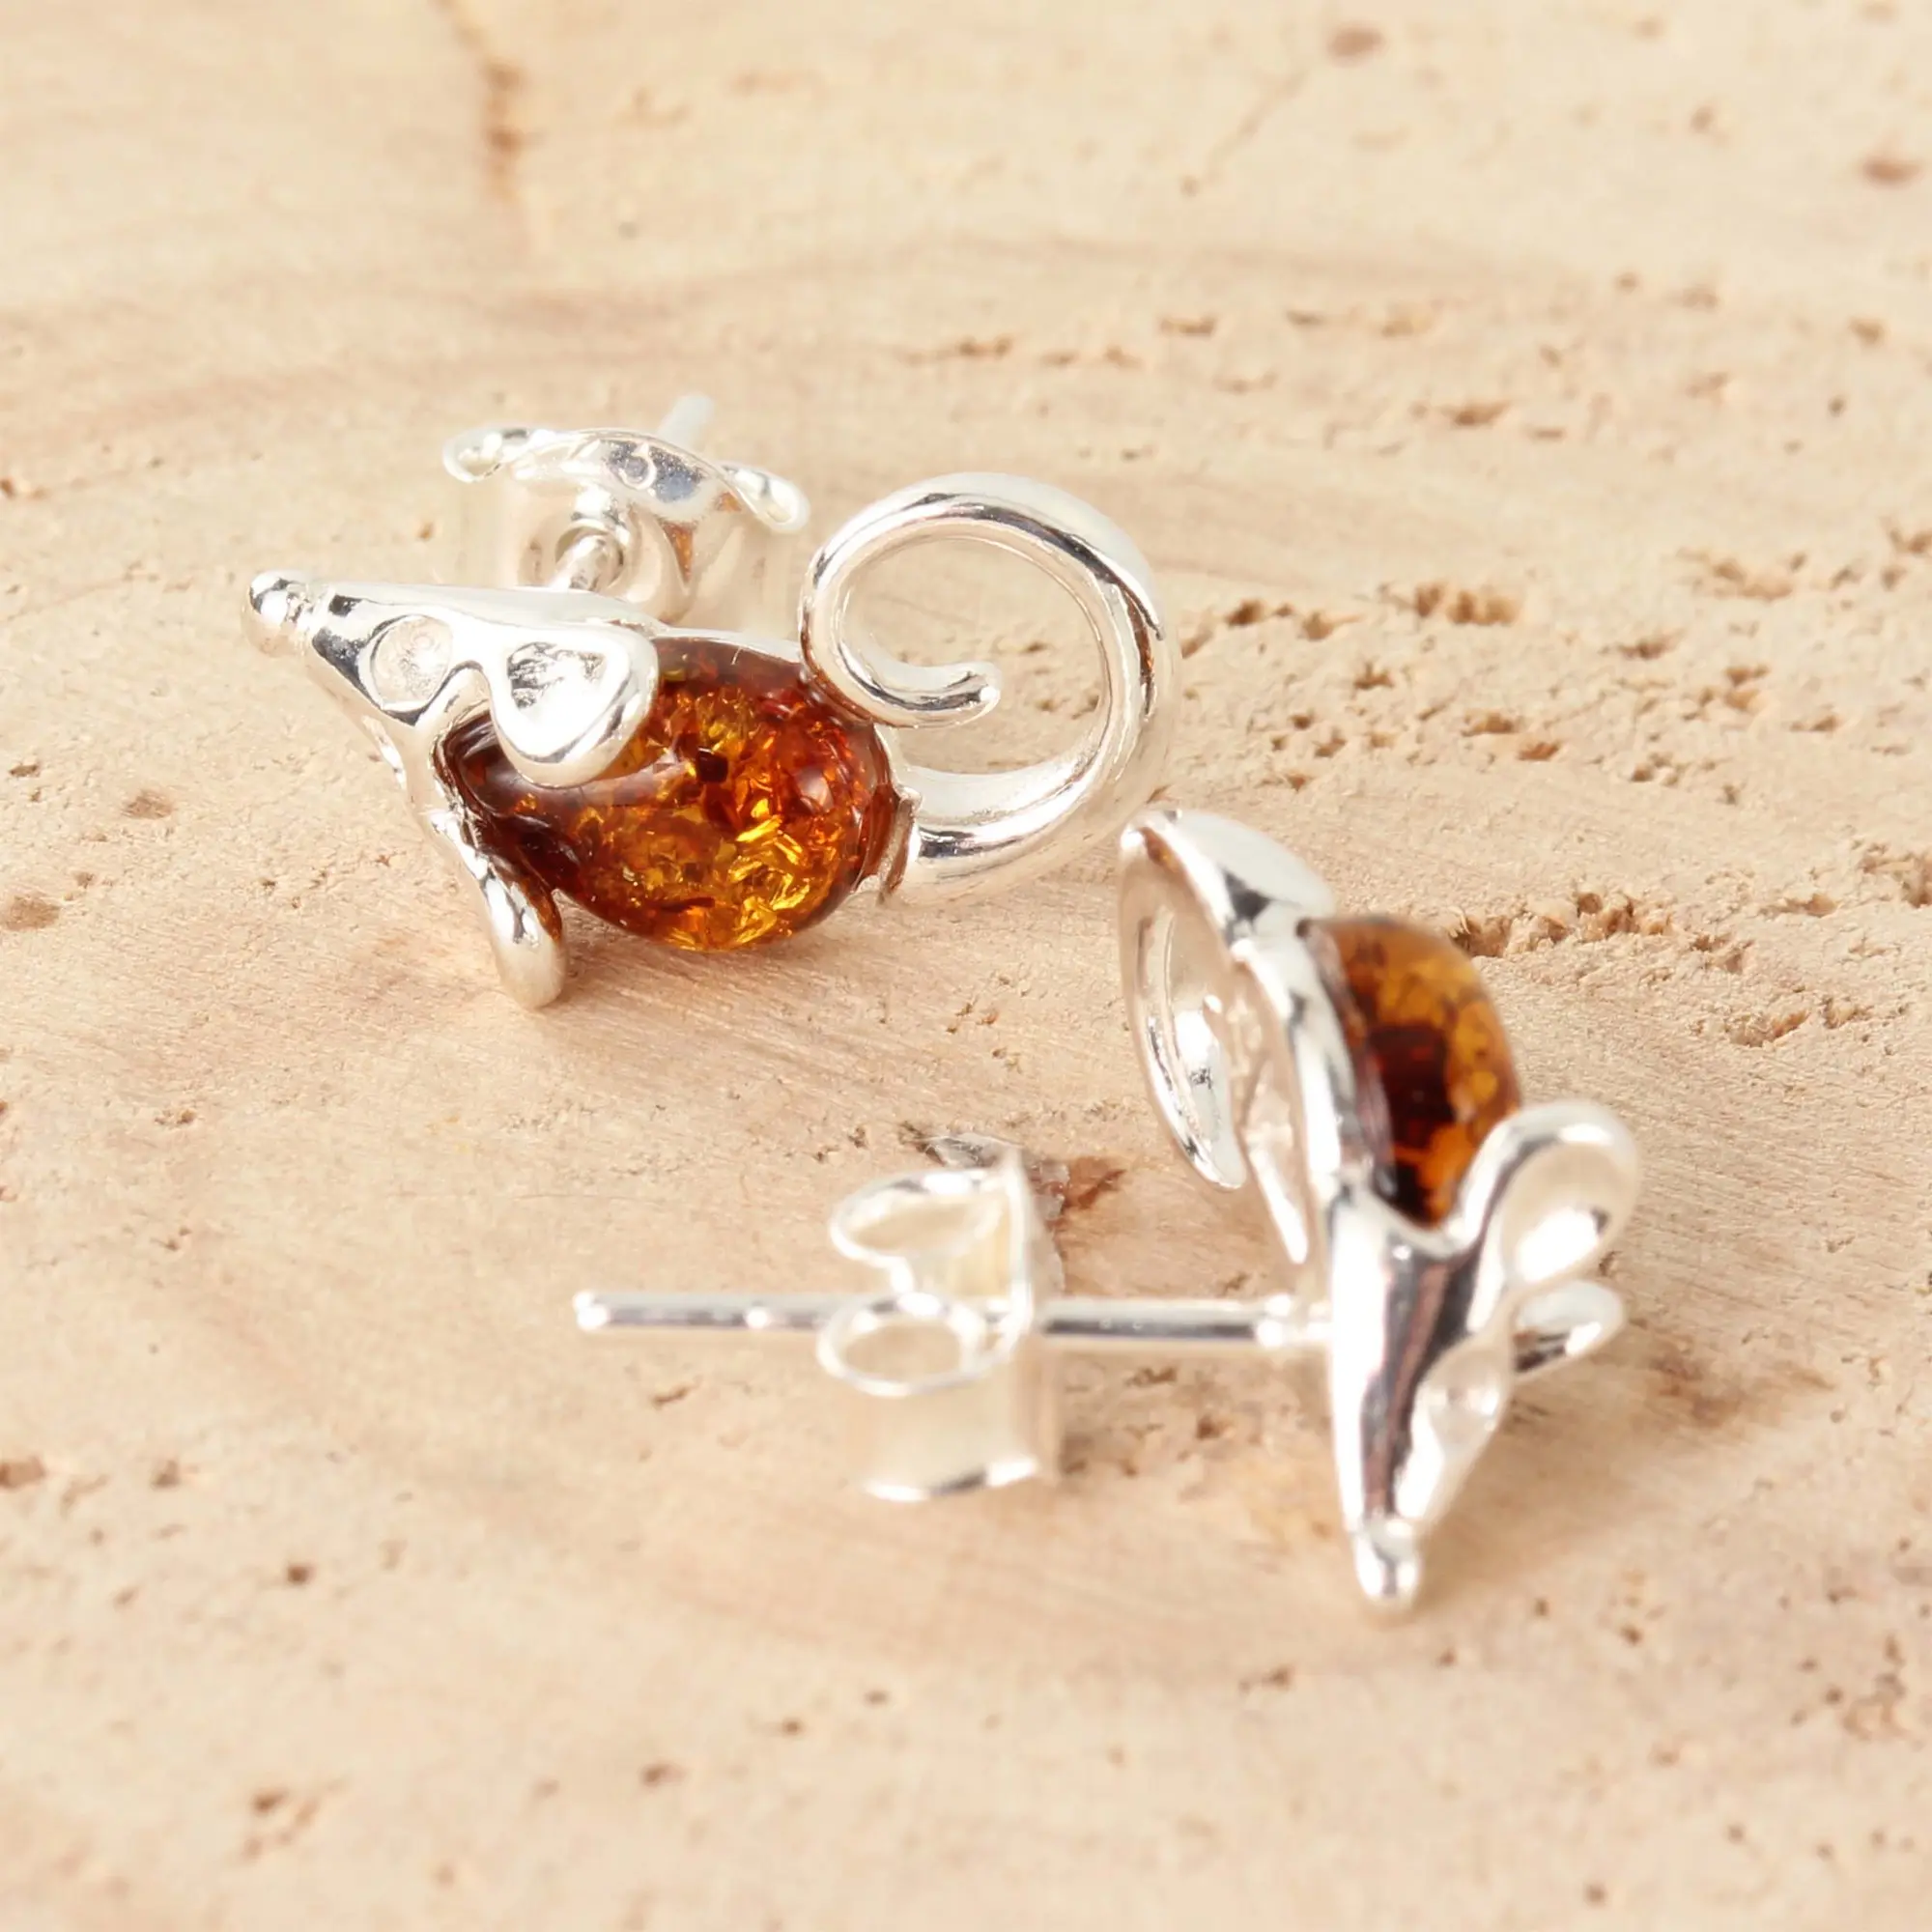 Top more than 219 amber and silver earrings super hot